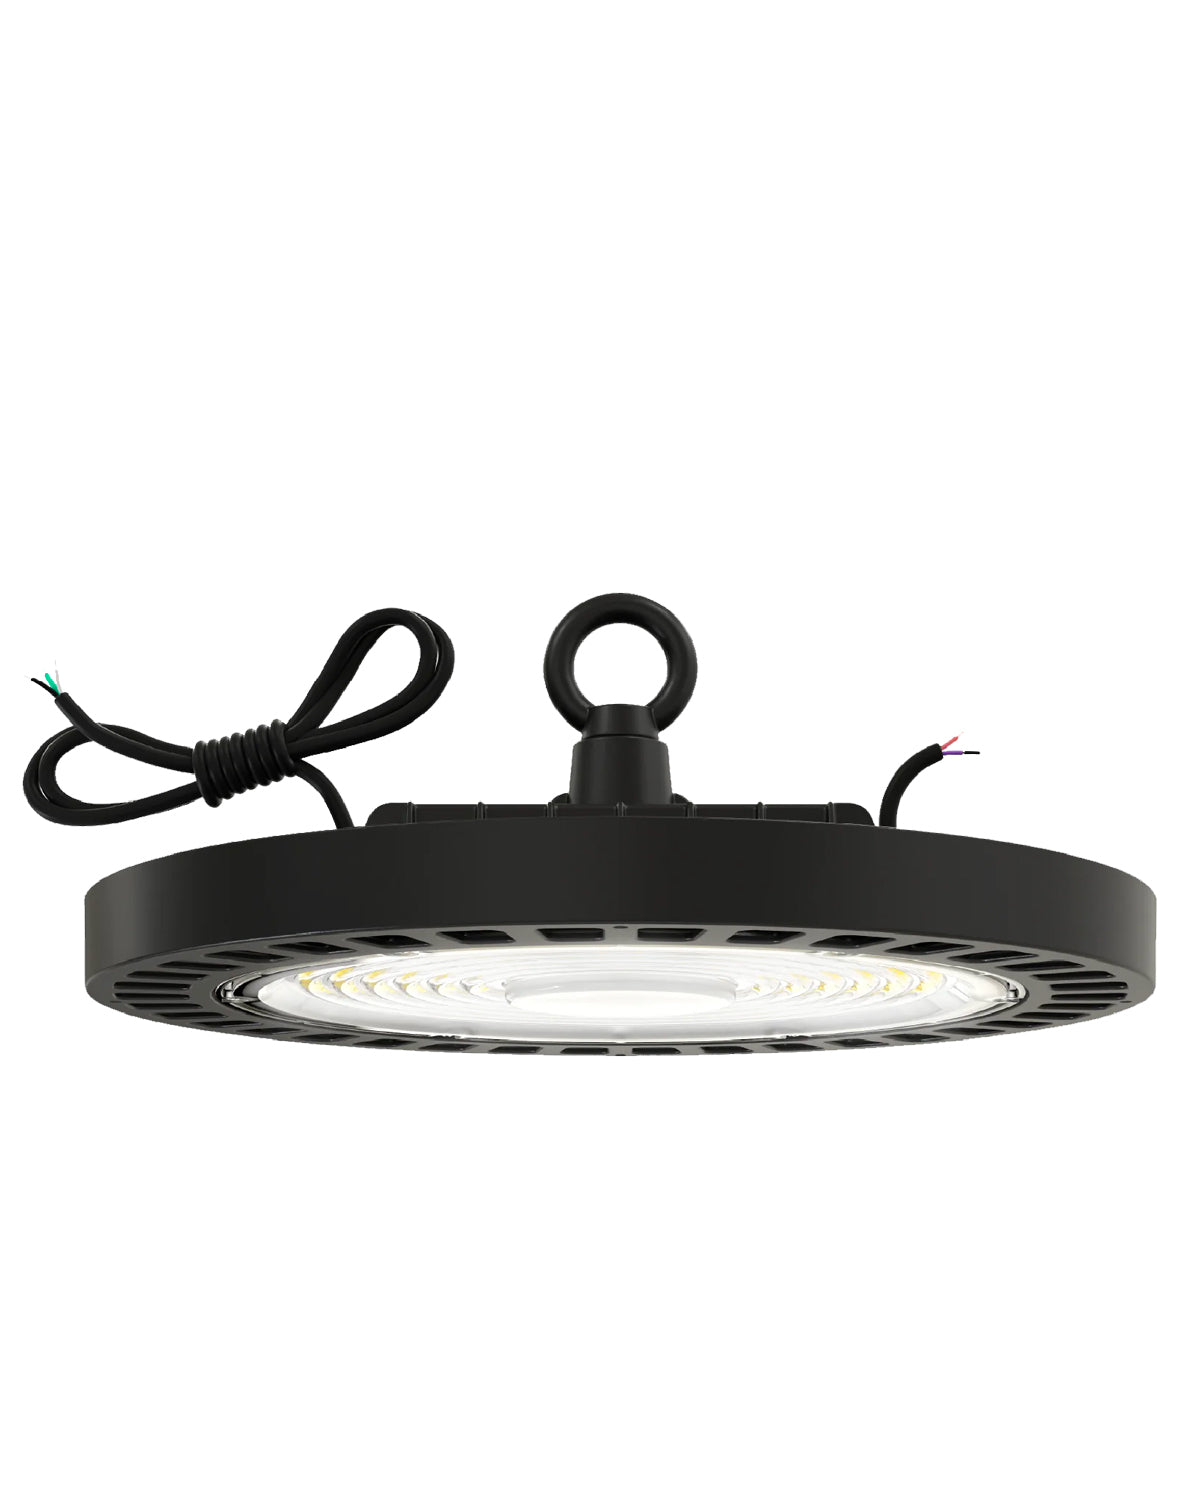 UFO LED High Bay Light 180/200/240W - 3000K/4000/5000K Tunable, 38400Lm, IP65 Waterproof, 0-10V Dimmable, Ideal for High Ceiling Areas: Commercial Shops, Workshops, Factories, Barns, and Garages Lighting Solution White